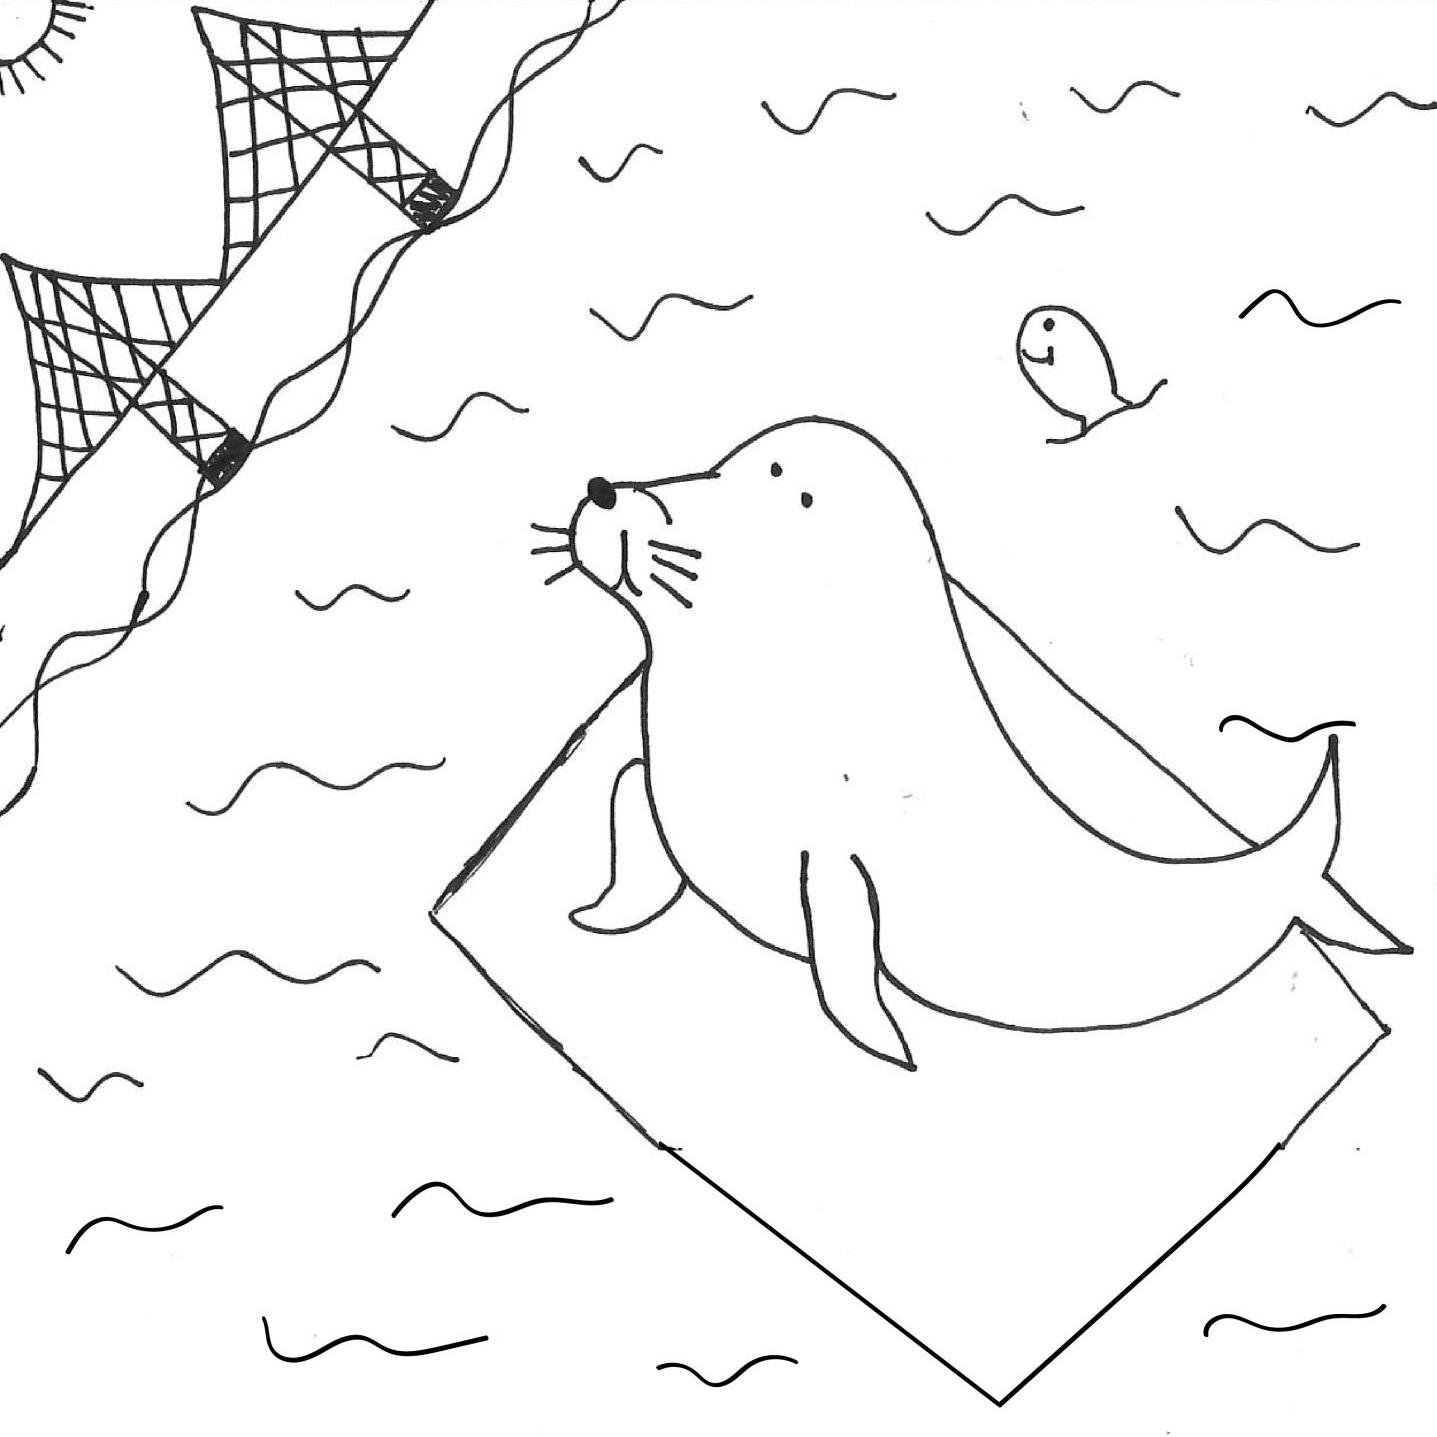 Lockdown lowdown contest coloring pages coastal life